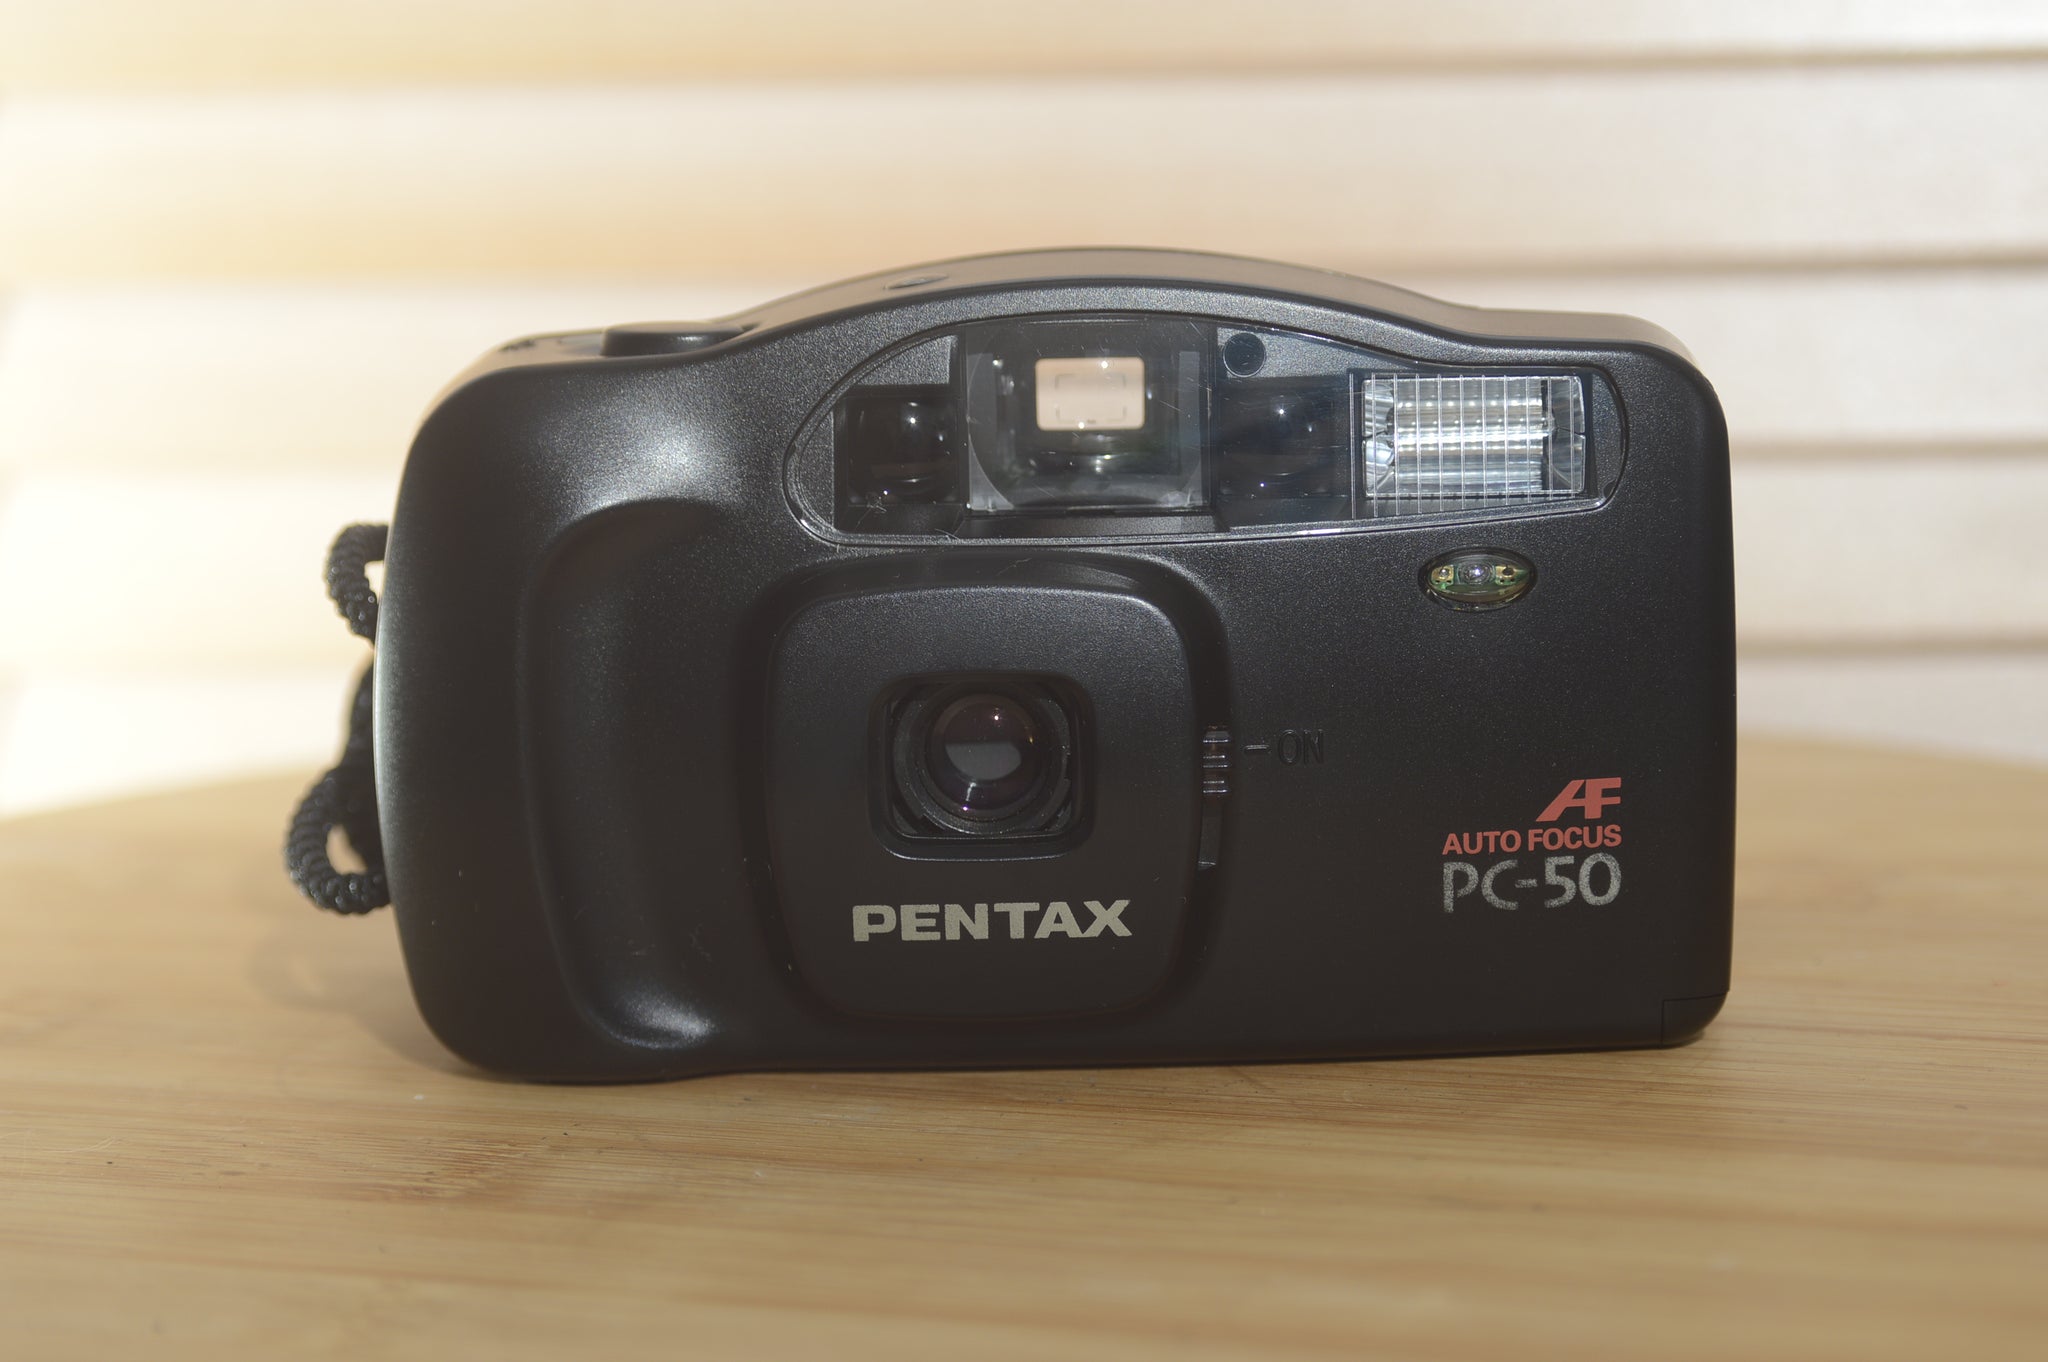 Pentax AF PC-50 35mm Compact Camera with Case. - RewindCameras quality vintage cameras, fully tested and serviced